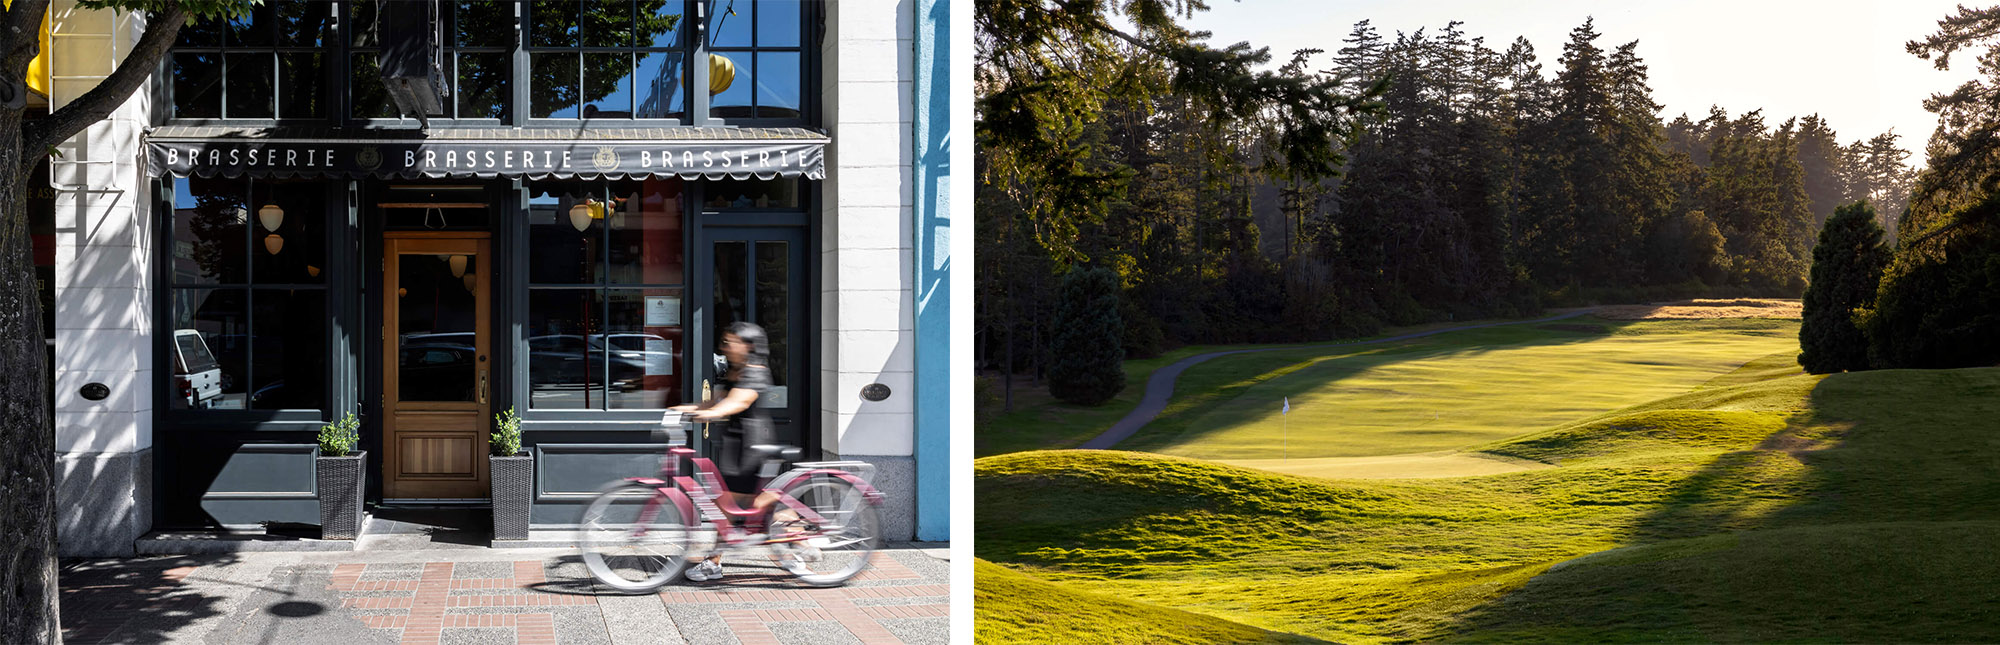 Active transportation and leisure activities in the near downtown Victoria, BC.